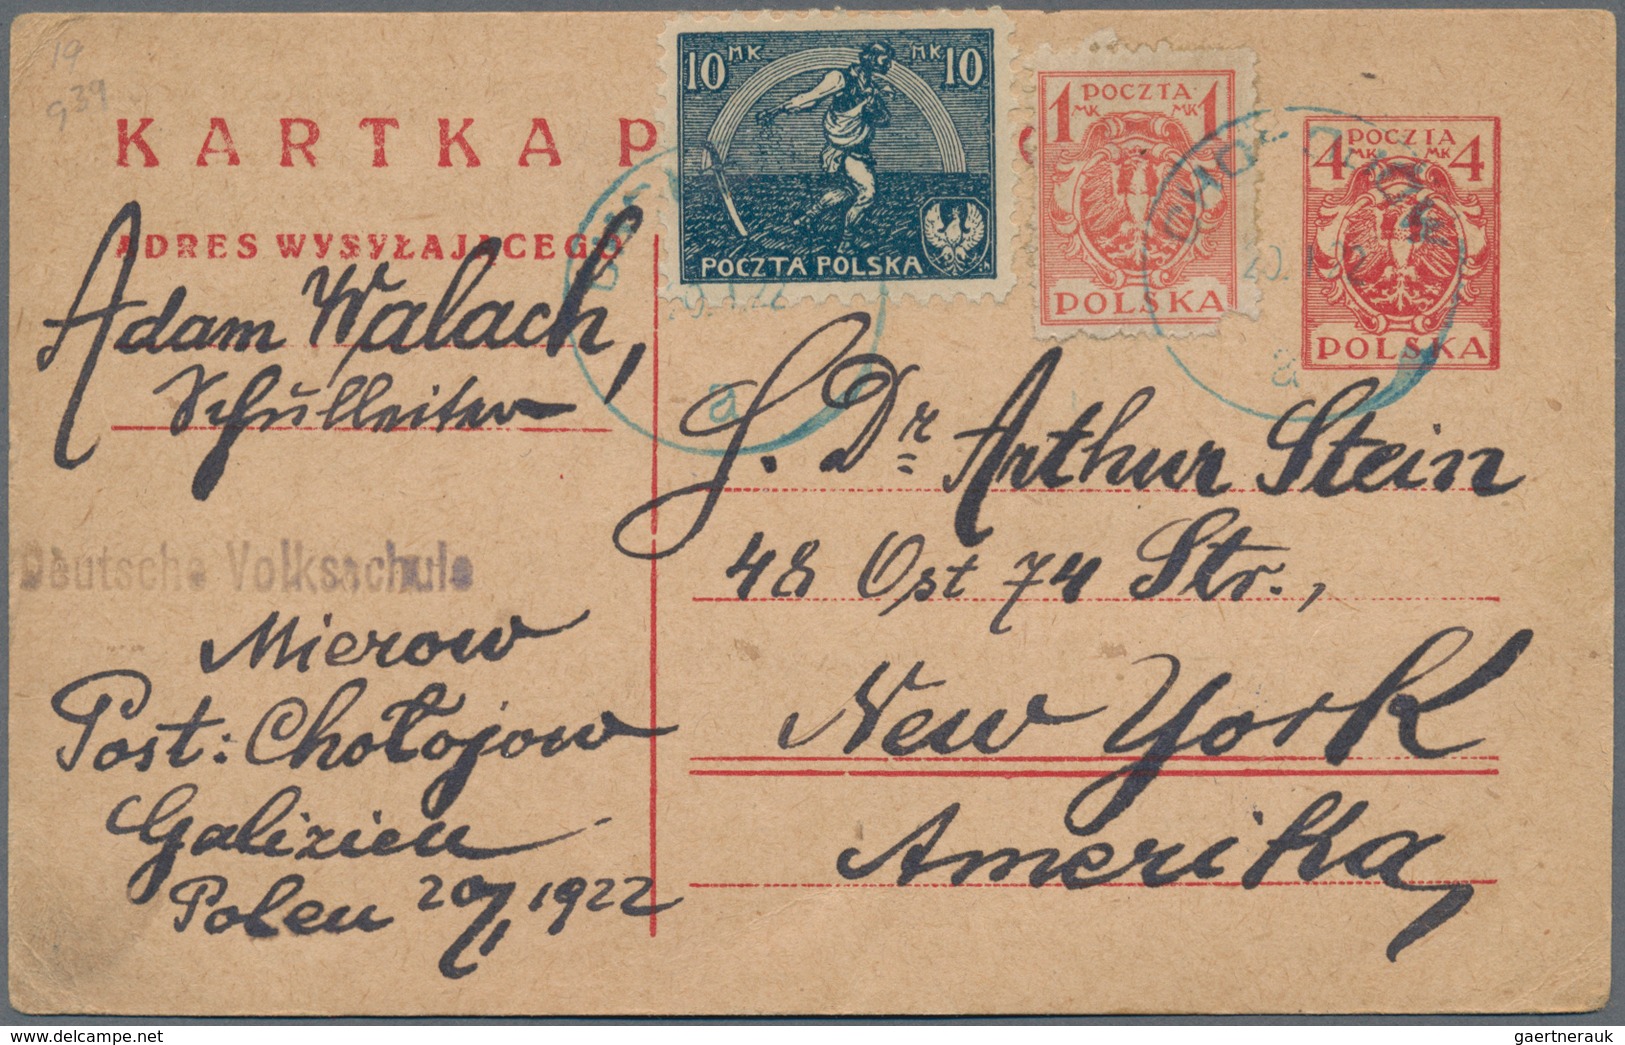 Polen - Ganzsachen: 1918/75 (ca.) holding of ca. 890 unused and used postal stationery postcards wit